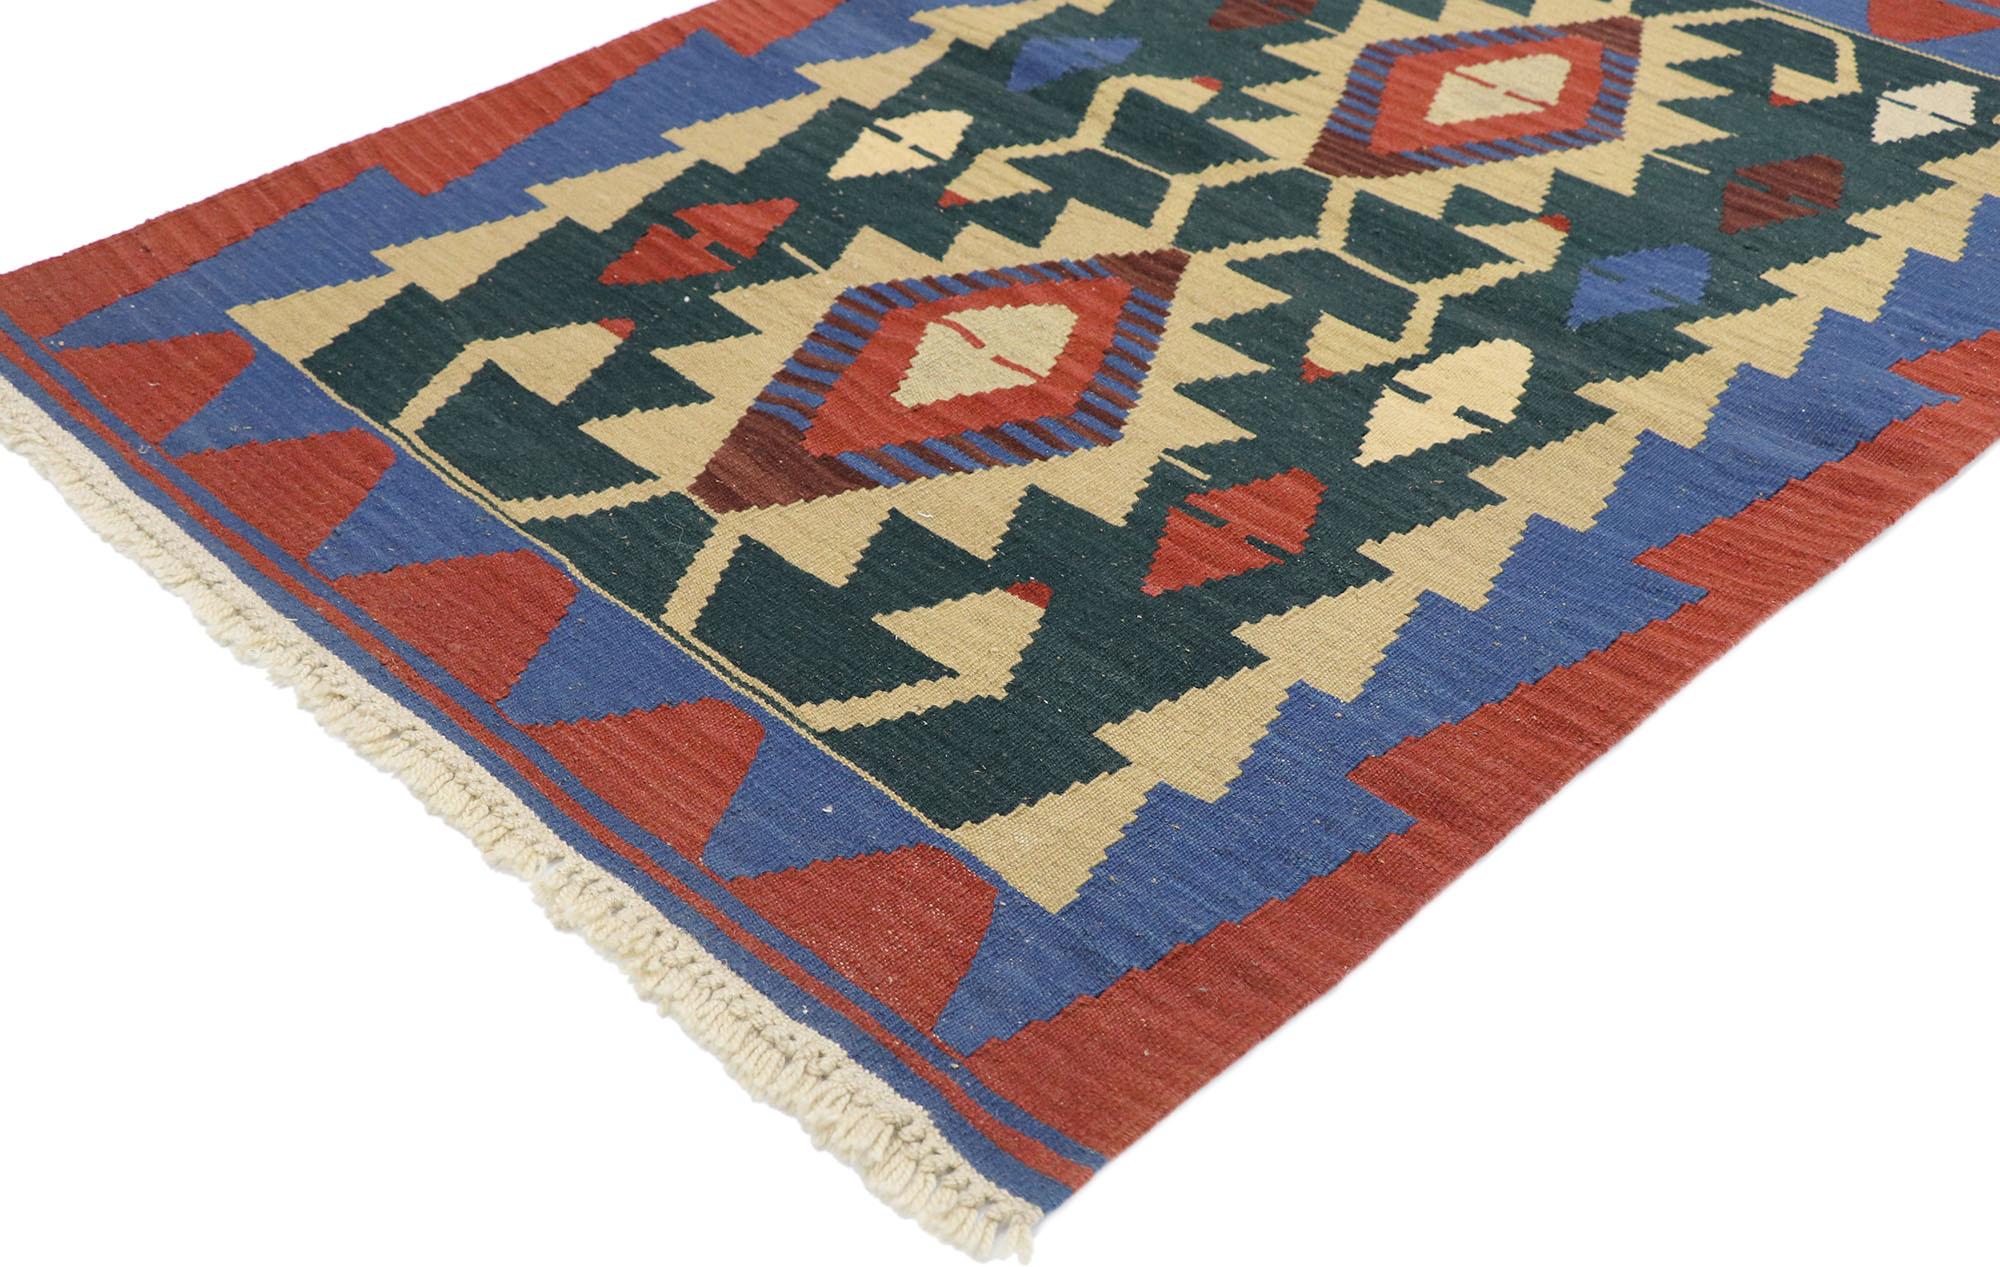 77848, vintage Persian Shiraz Kilim rug with Tribal style. Full of tiny details and a bold expressive design combined with vibrant colors and tribal style, this hand-woven wool vintage Persian Shiraz kilim rug is a captivating vision of woven